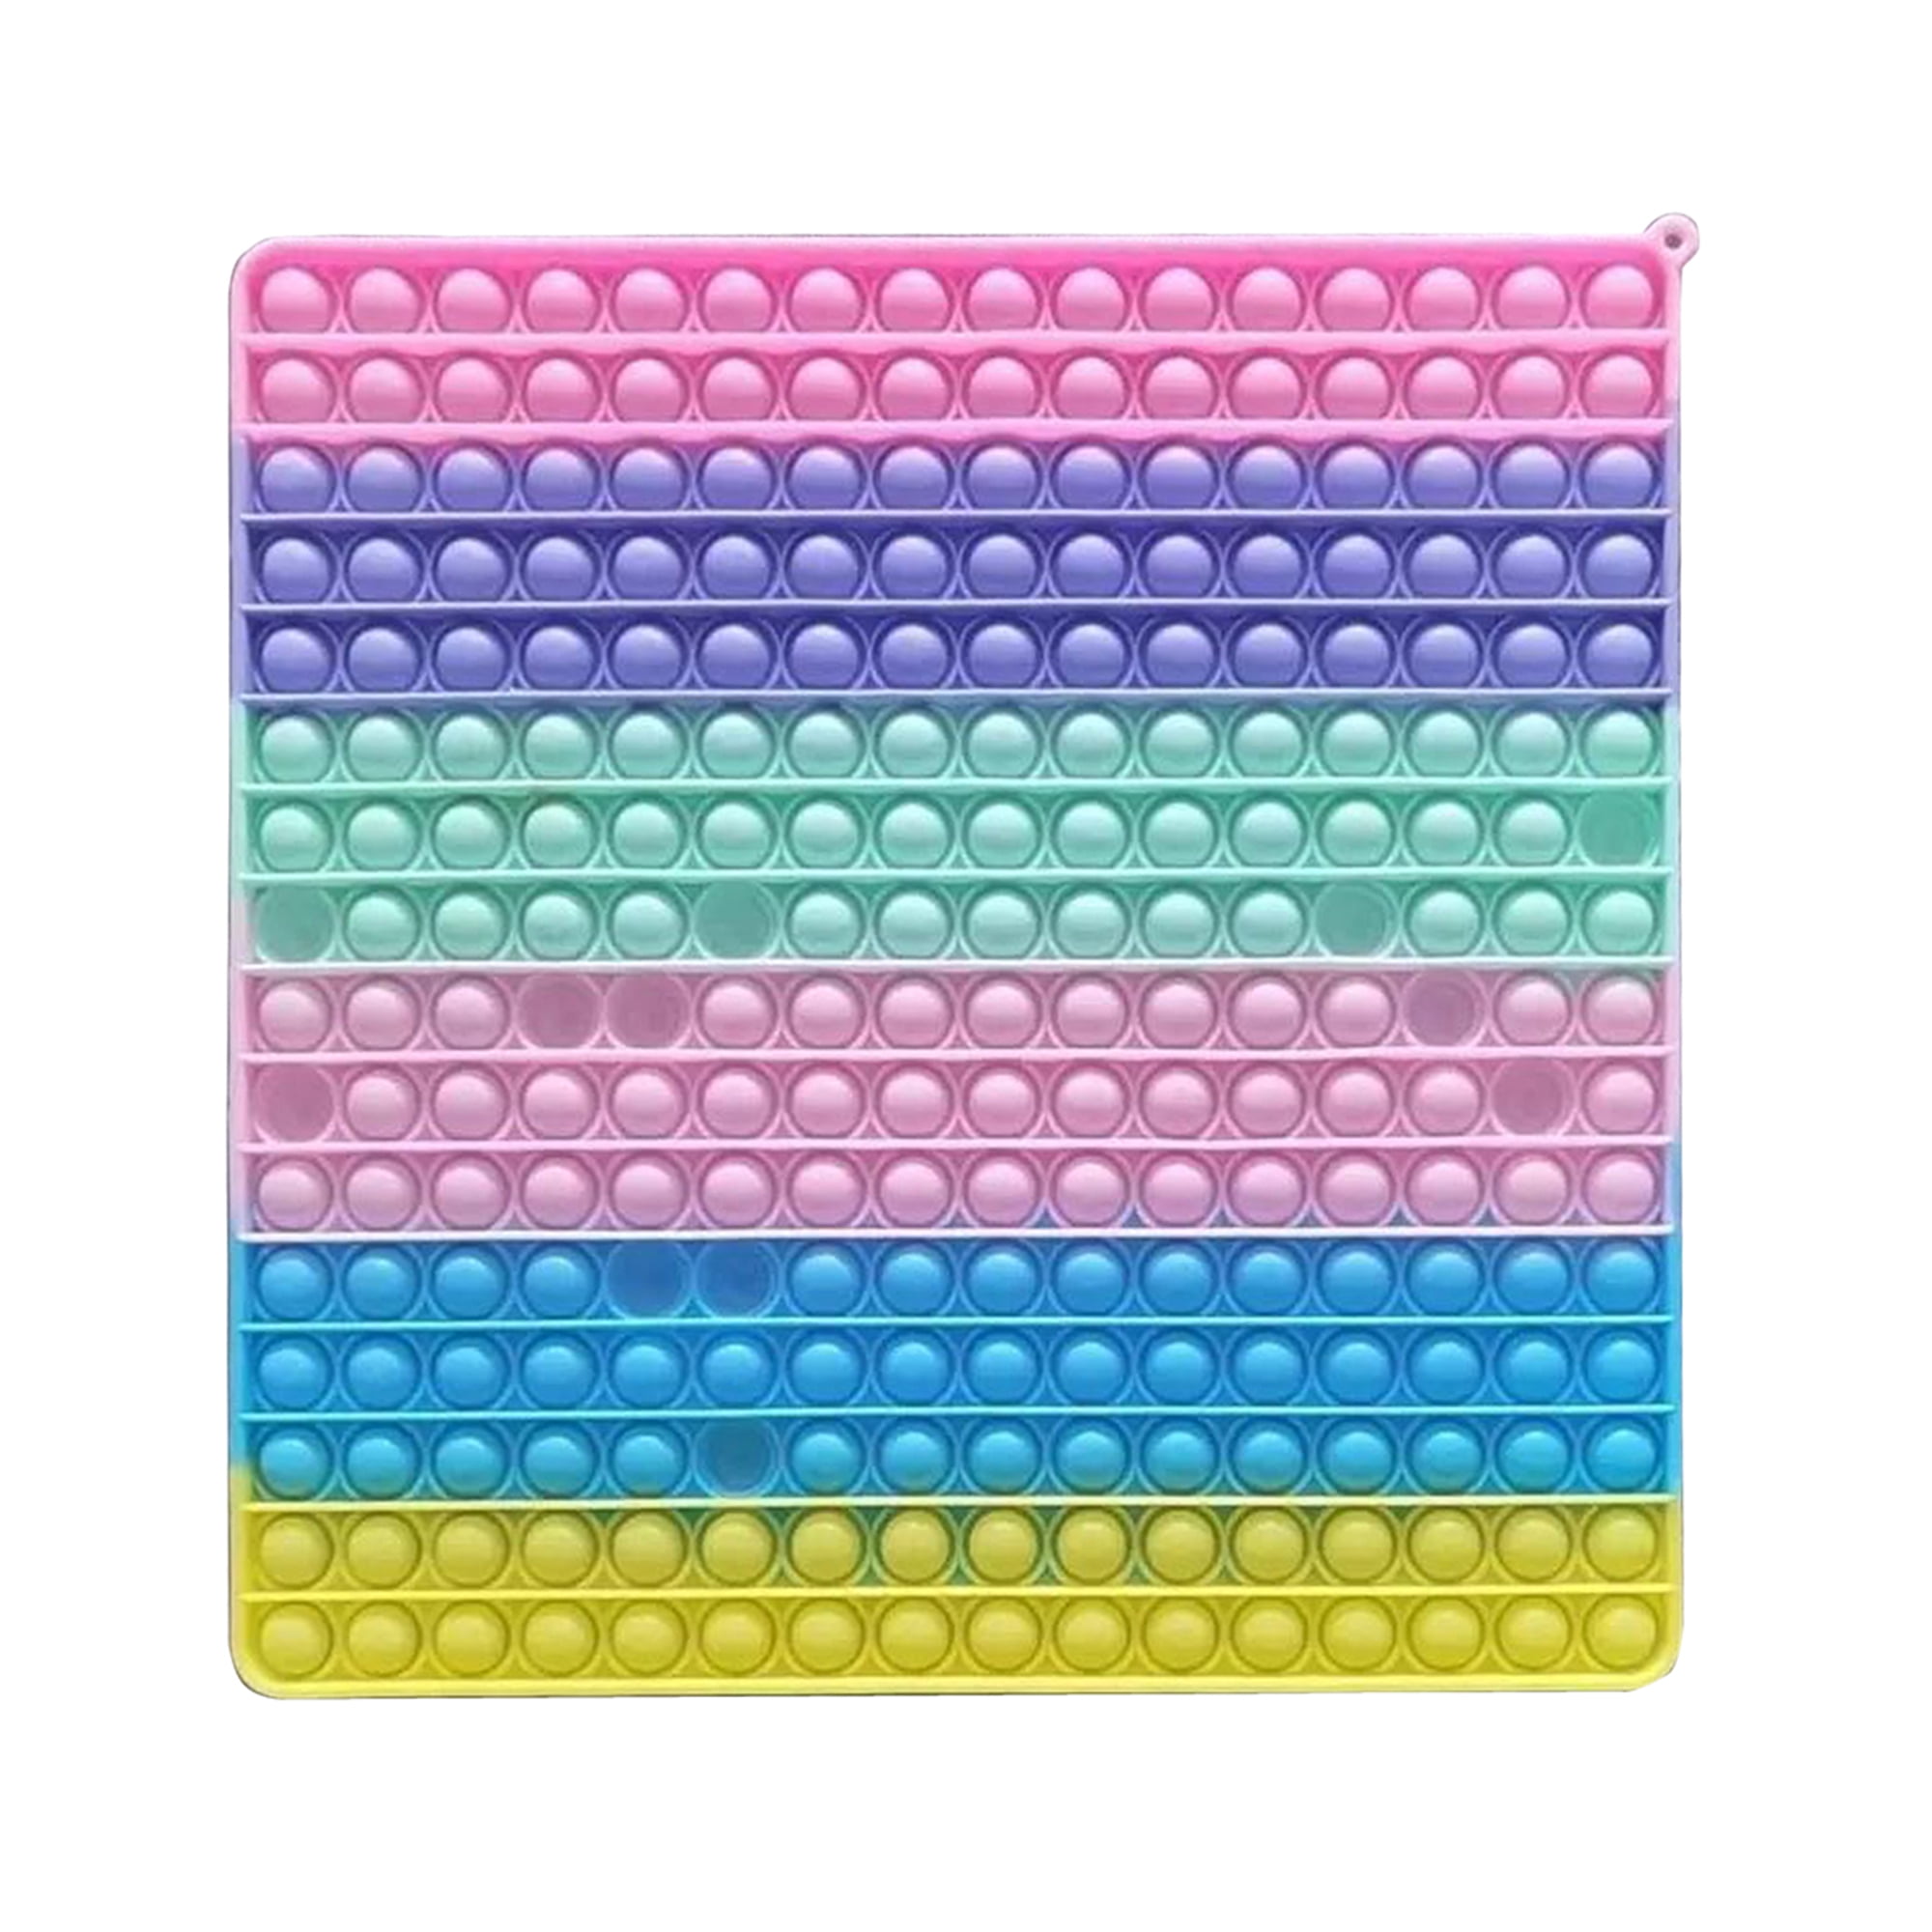 Big Size Rainbow Square Giant Huge Pop Silicone Sensory Fidget Toy Game for Kids Adults Jumbo Pop 15.7 Inch 400 Bubbles Push Fidget Toy Autism Special Needs Stress Reliever Anxiety Relief Toys 